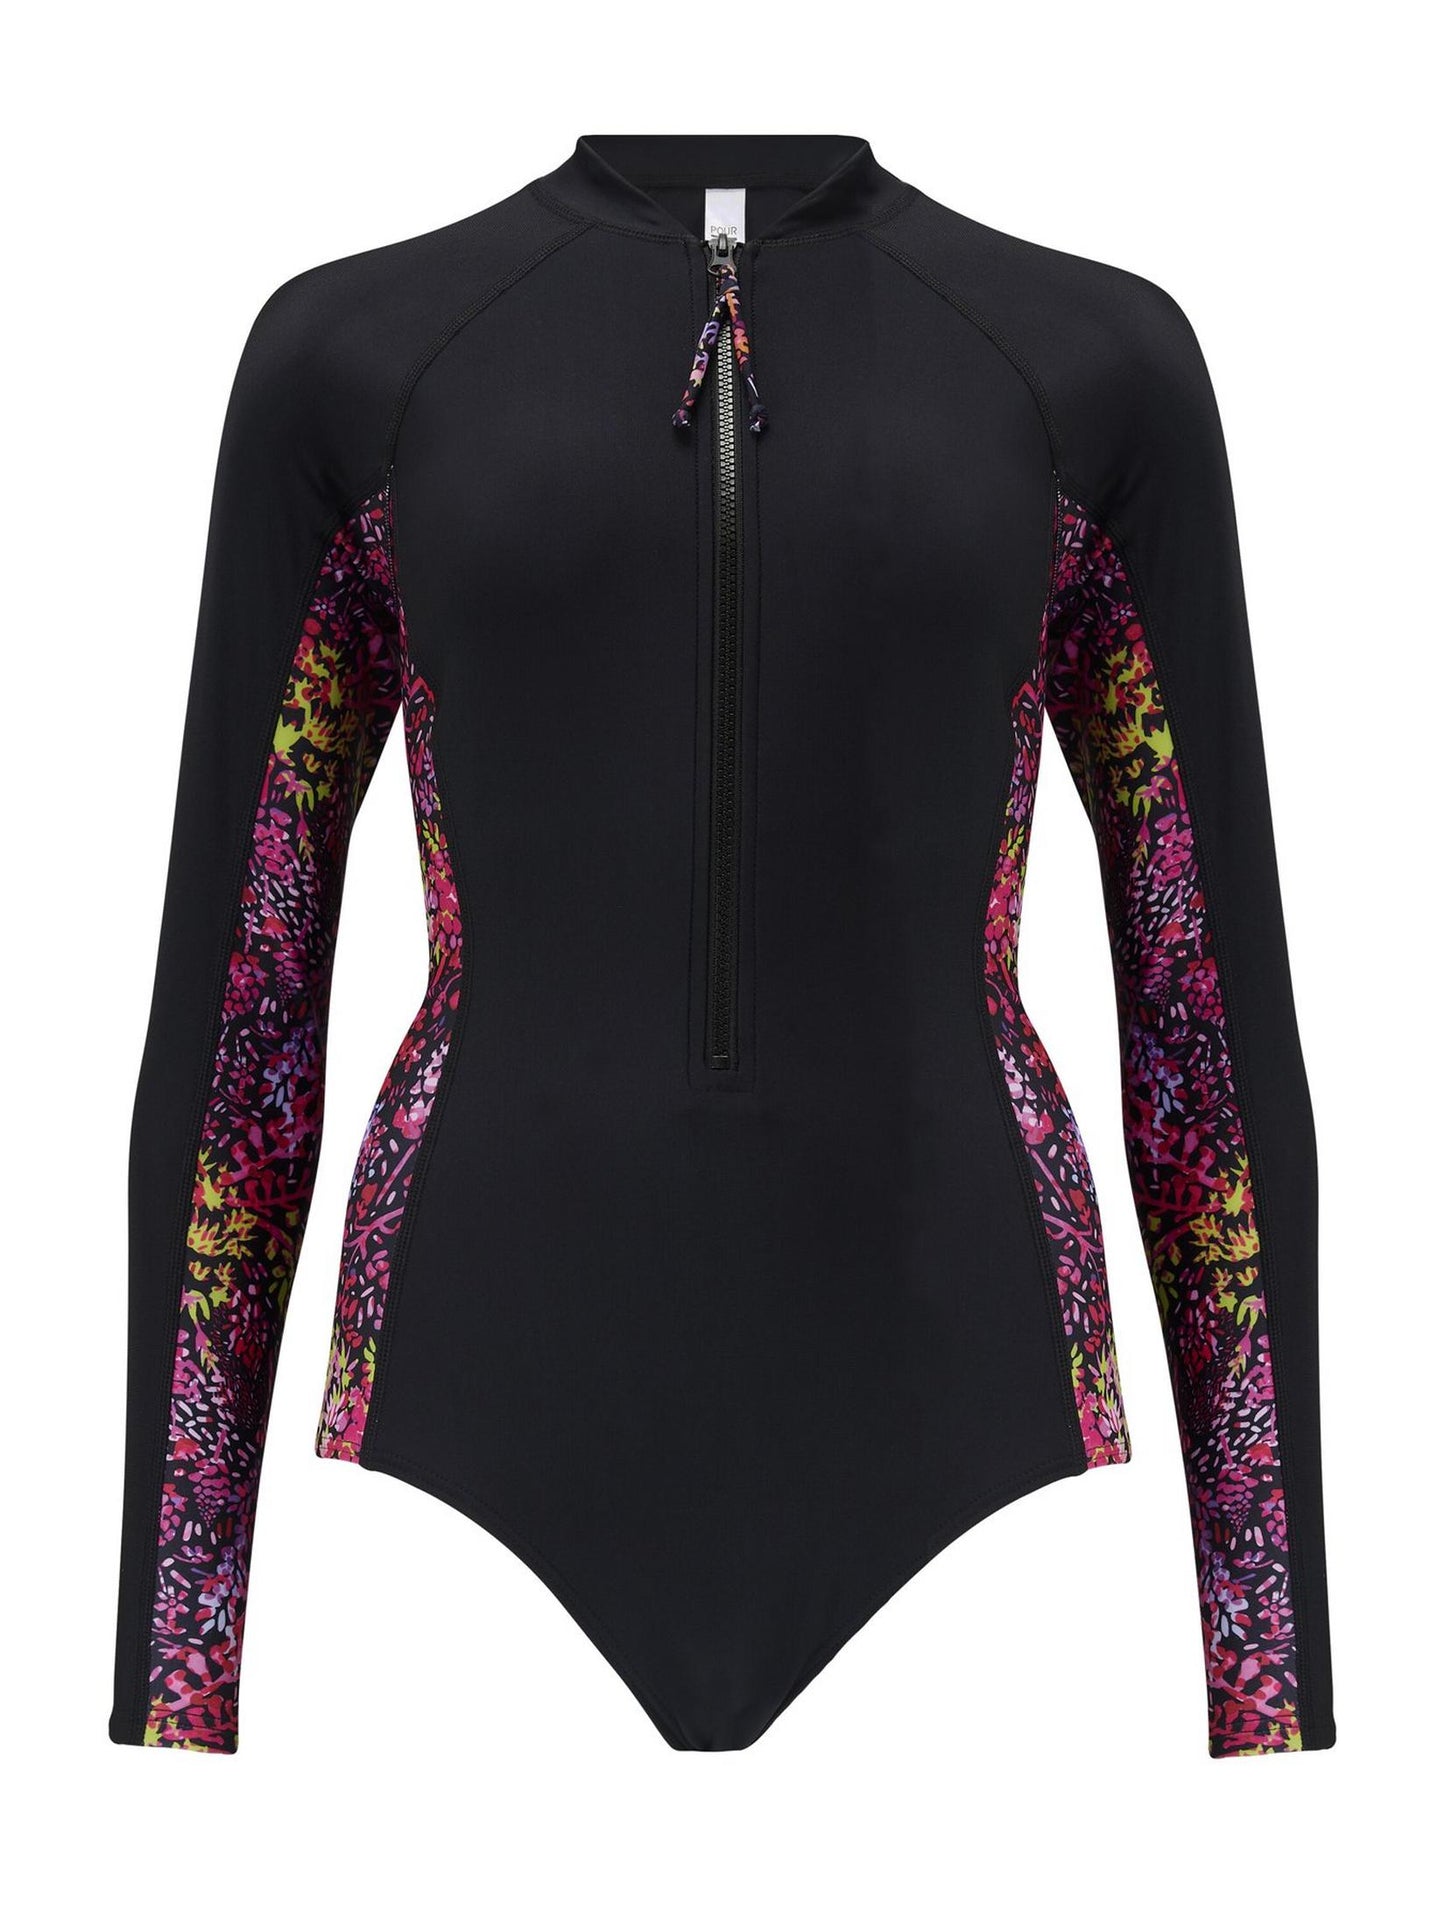 Pour Moi Energy Long Sleeved Zip Front Paddle Swimsuit - Black/Confetti